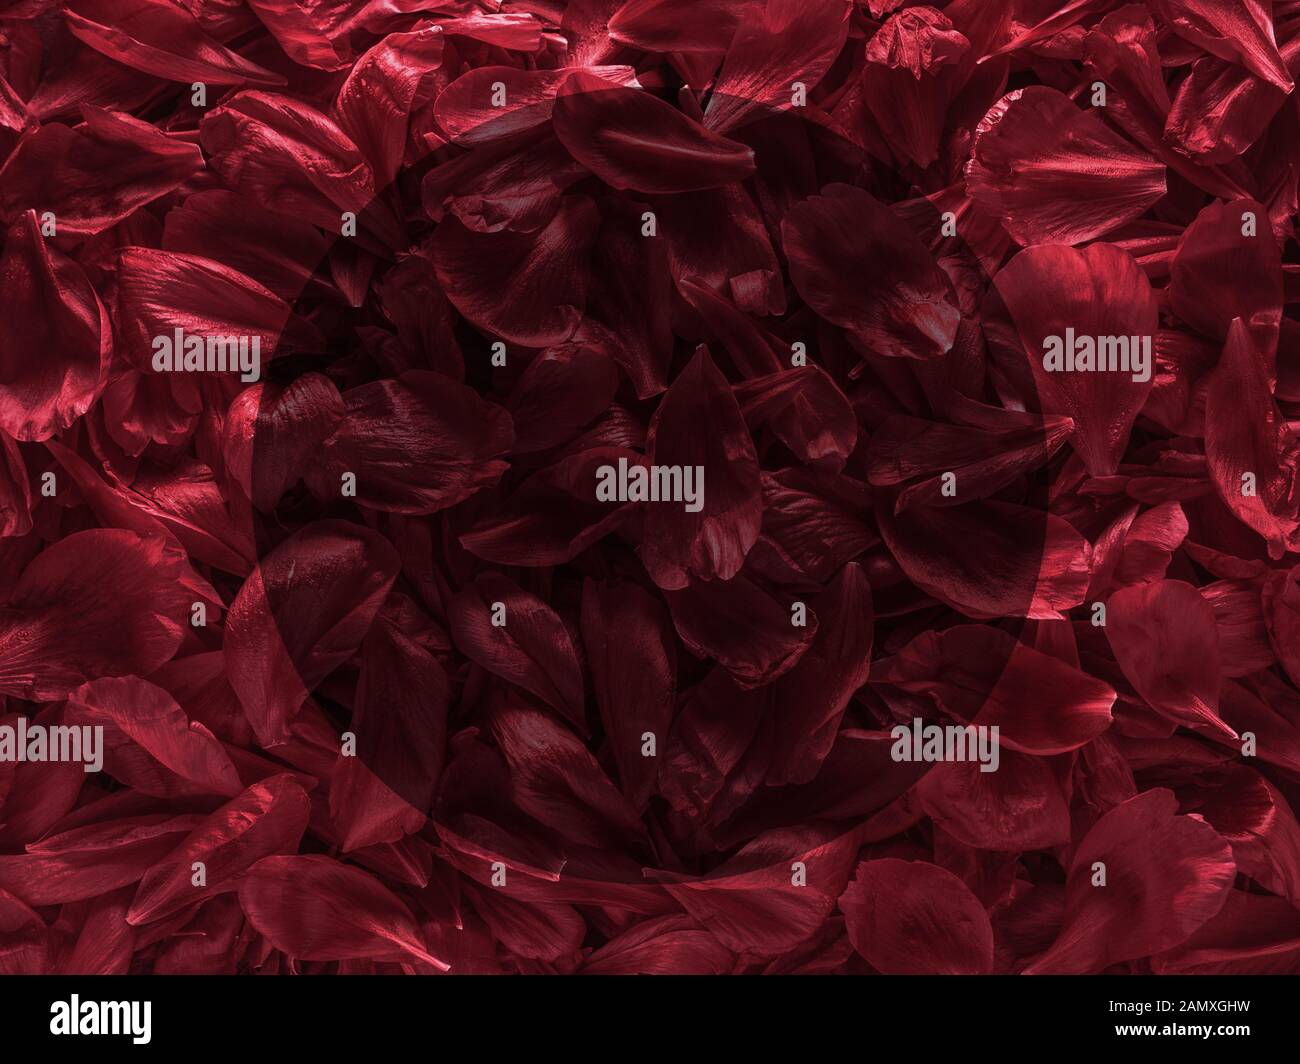 Background of red peony petals. Bright saturated red purple peony pattern background. Burgundy floral texture can use as wallpaper, card design Stock Photo